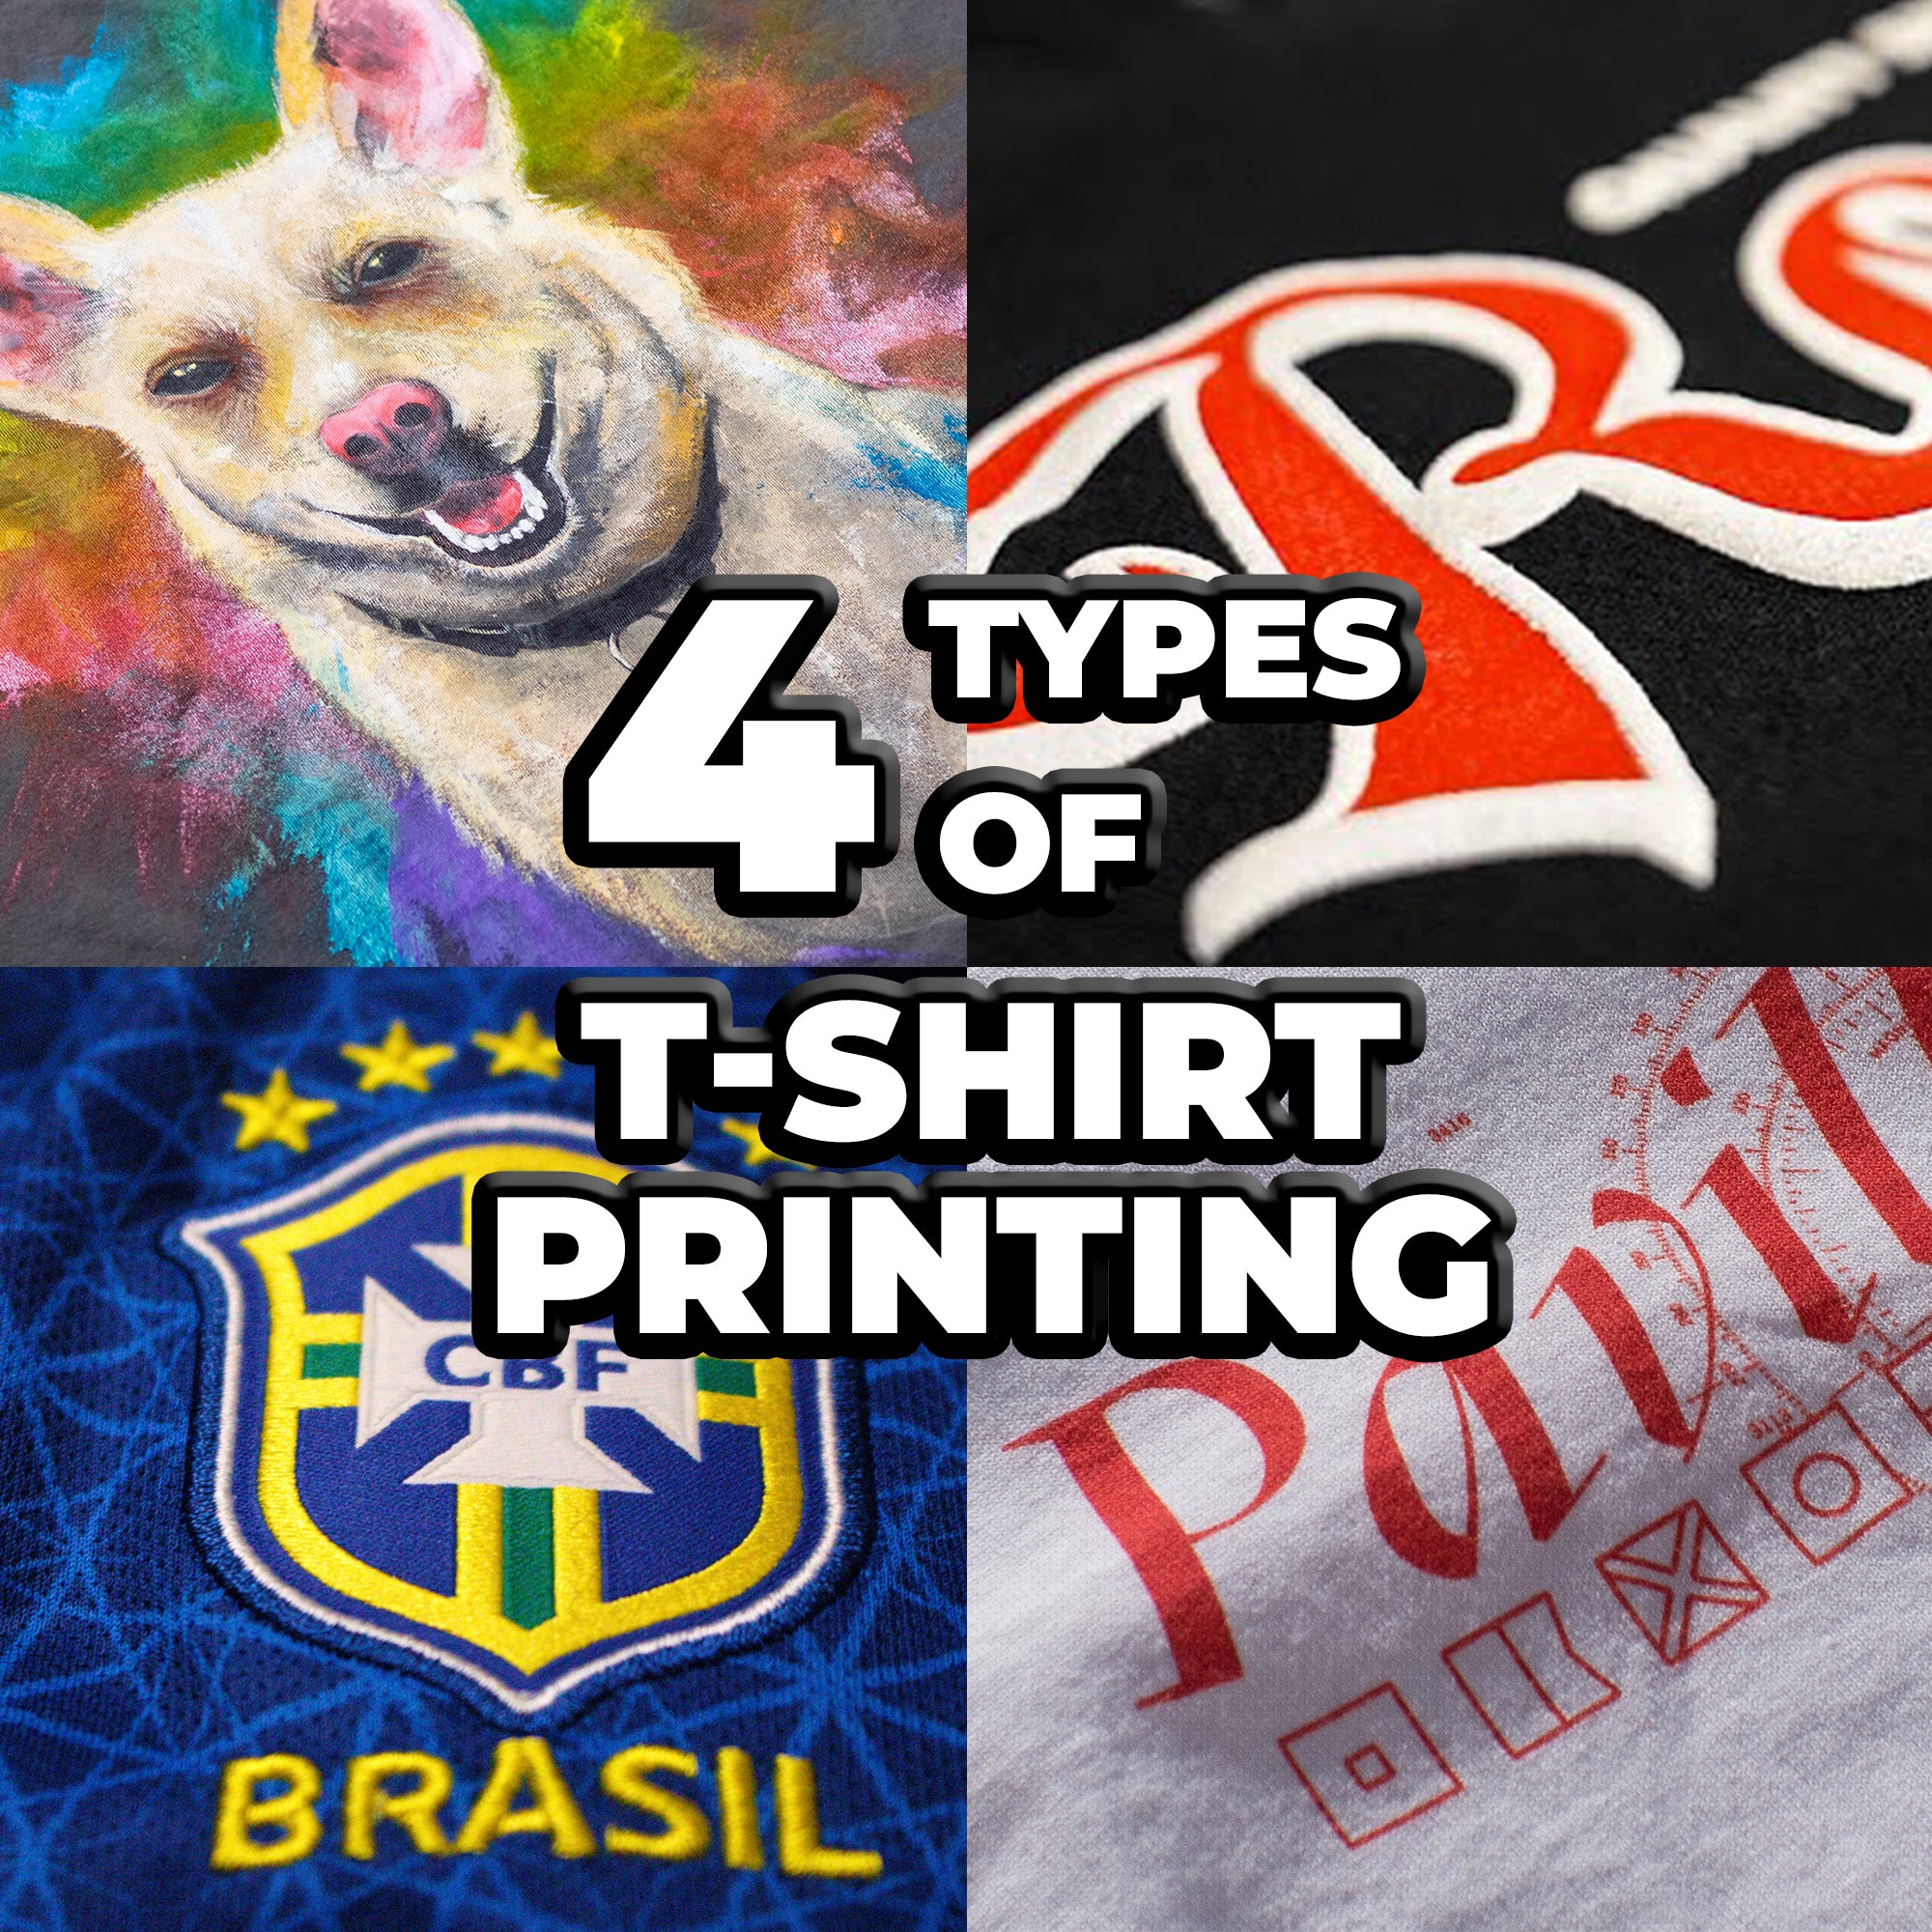 10 Most Popular Types of T-Shirt Printing